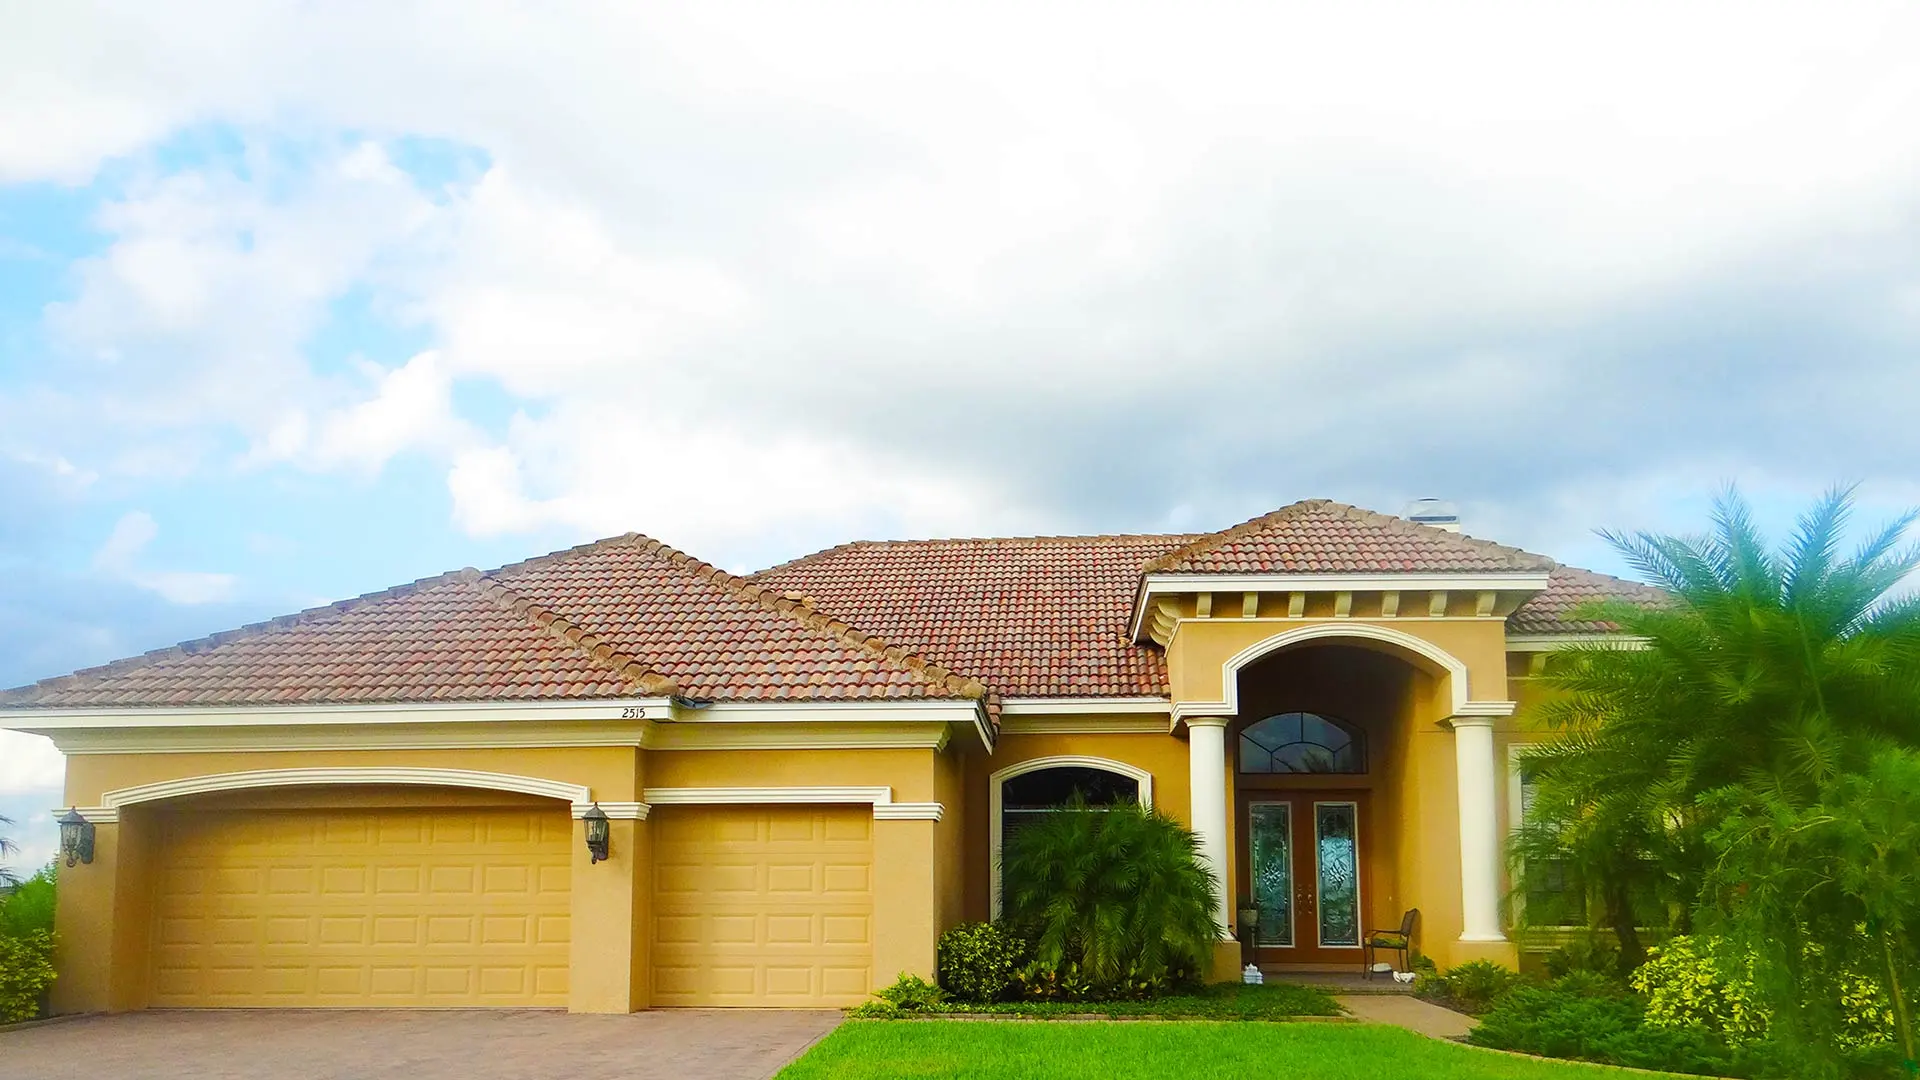 Winter Haven home after receiving roof leak repair services from True Builders.